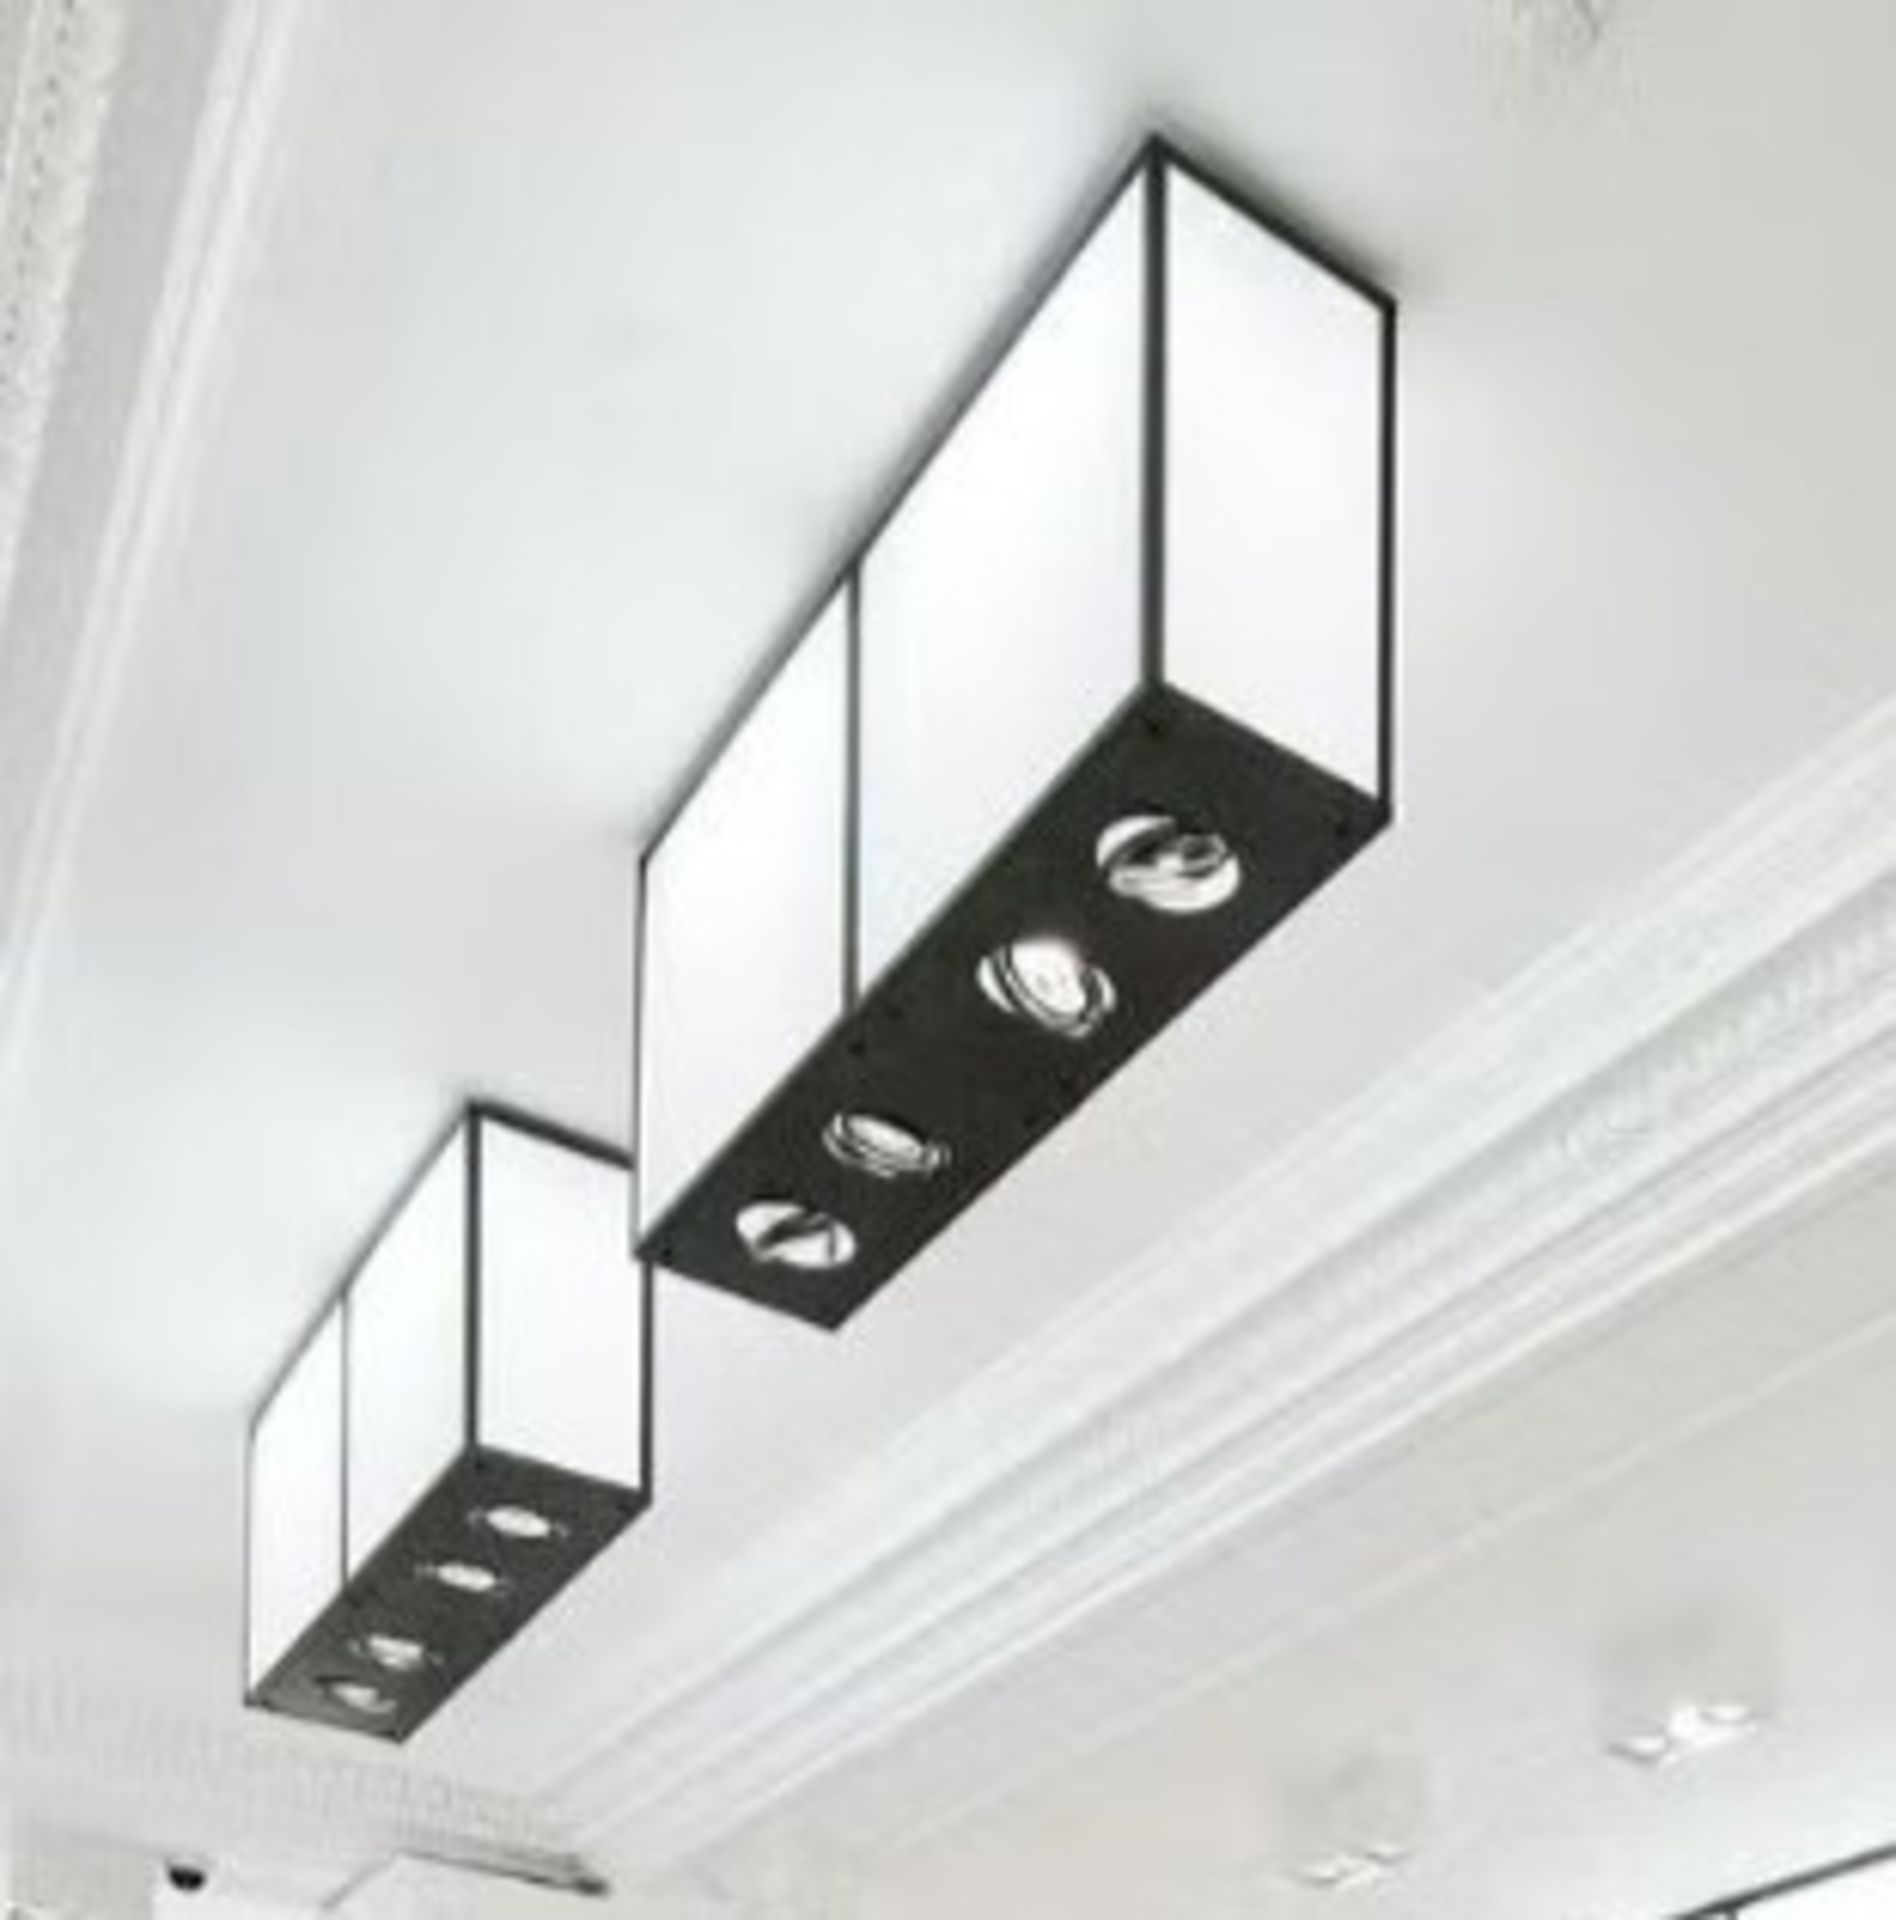 2 x Illuminated Decorative Ceiling Lights From a Famous London Department Store - Image 3 of 13